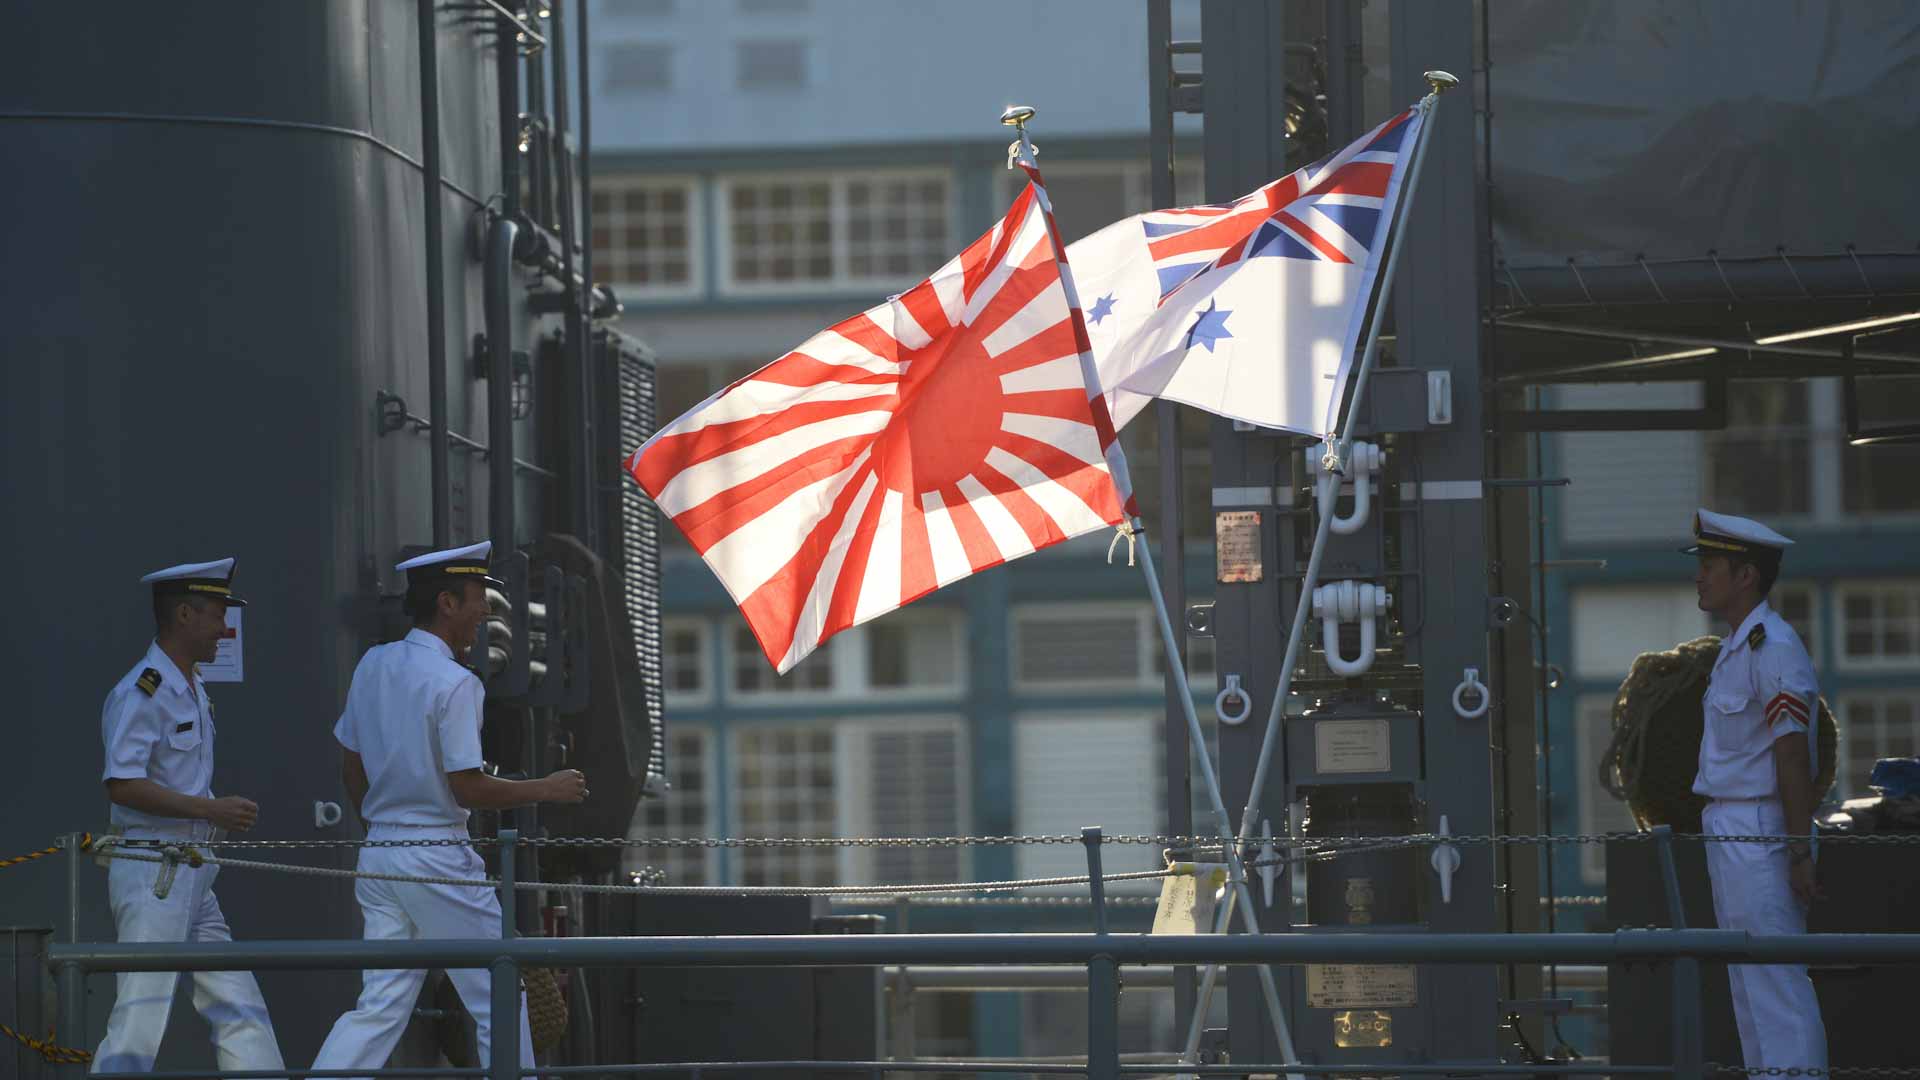 Australian and Japanese flags flying